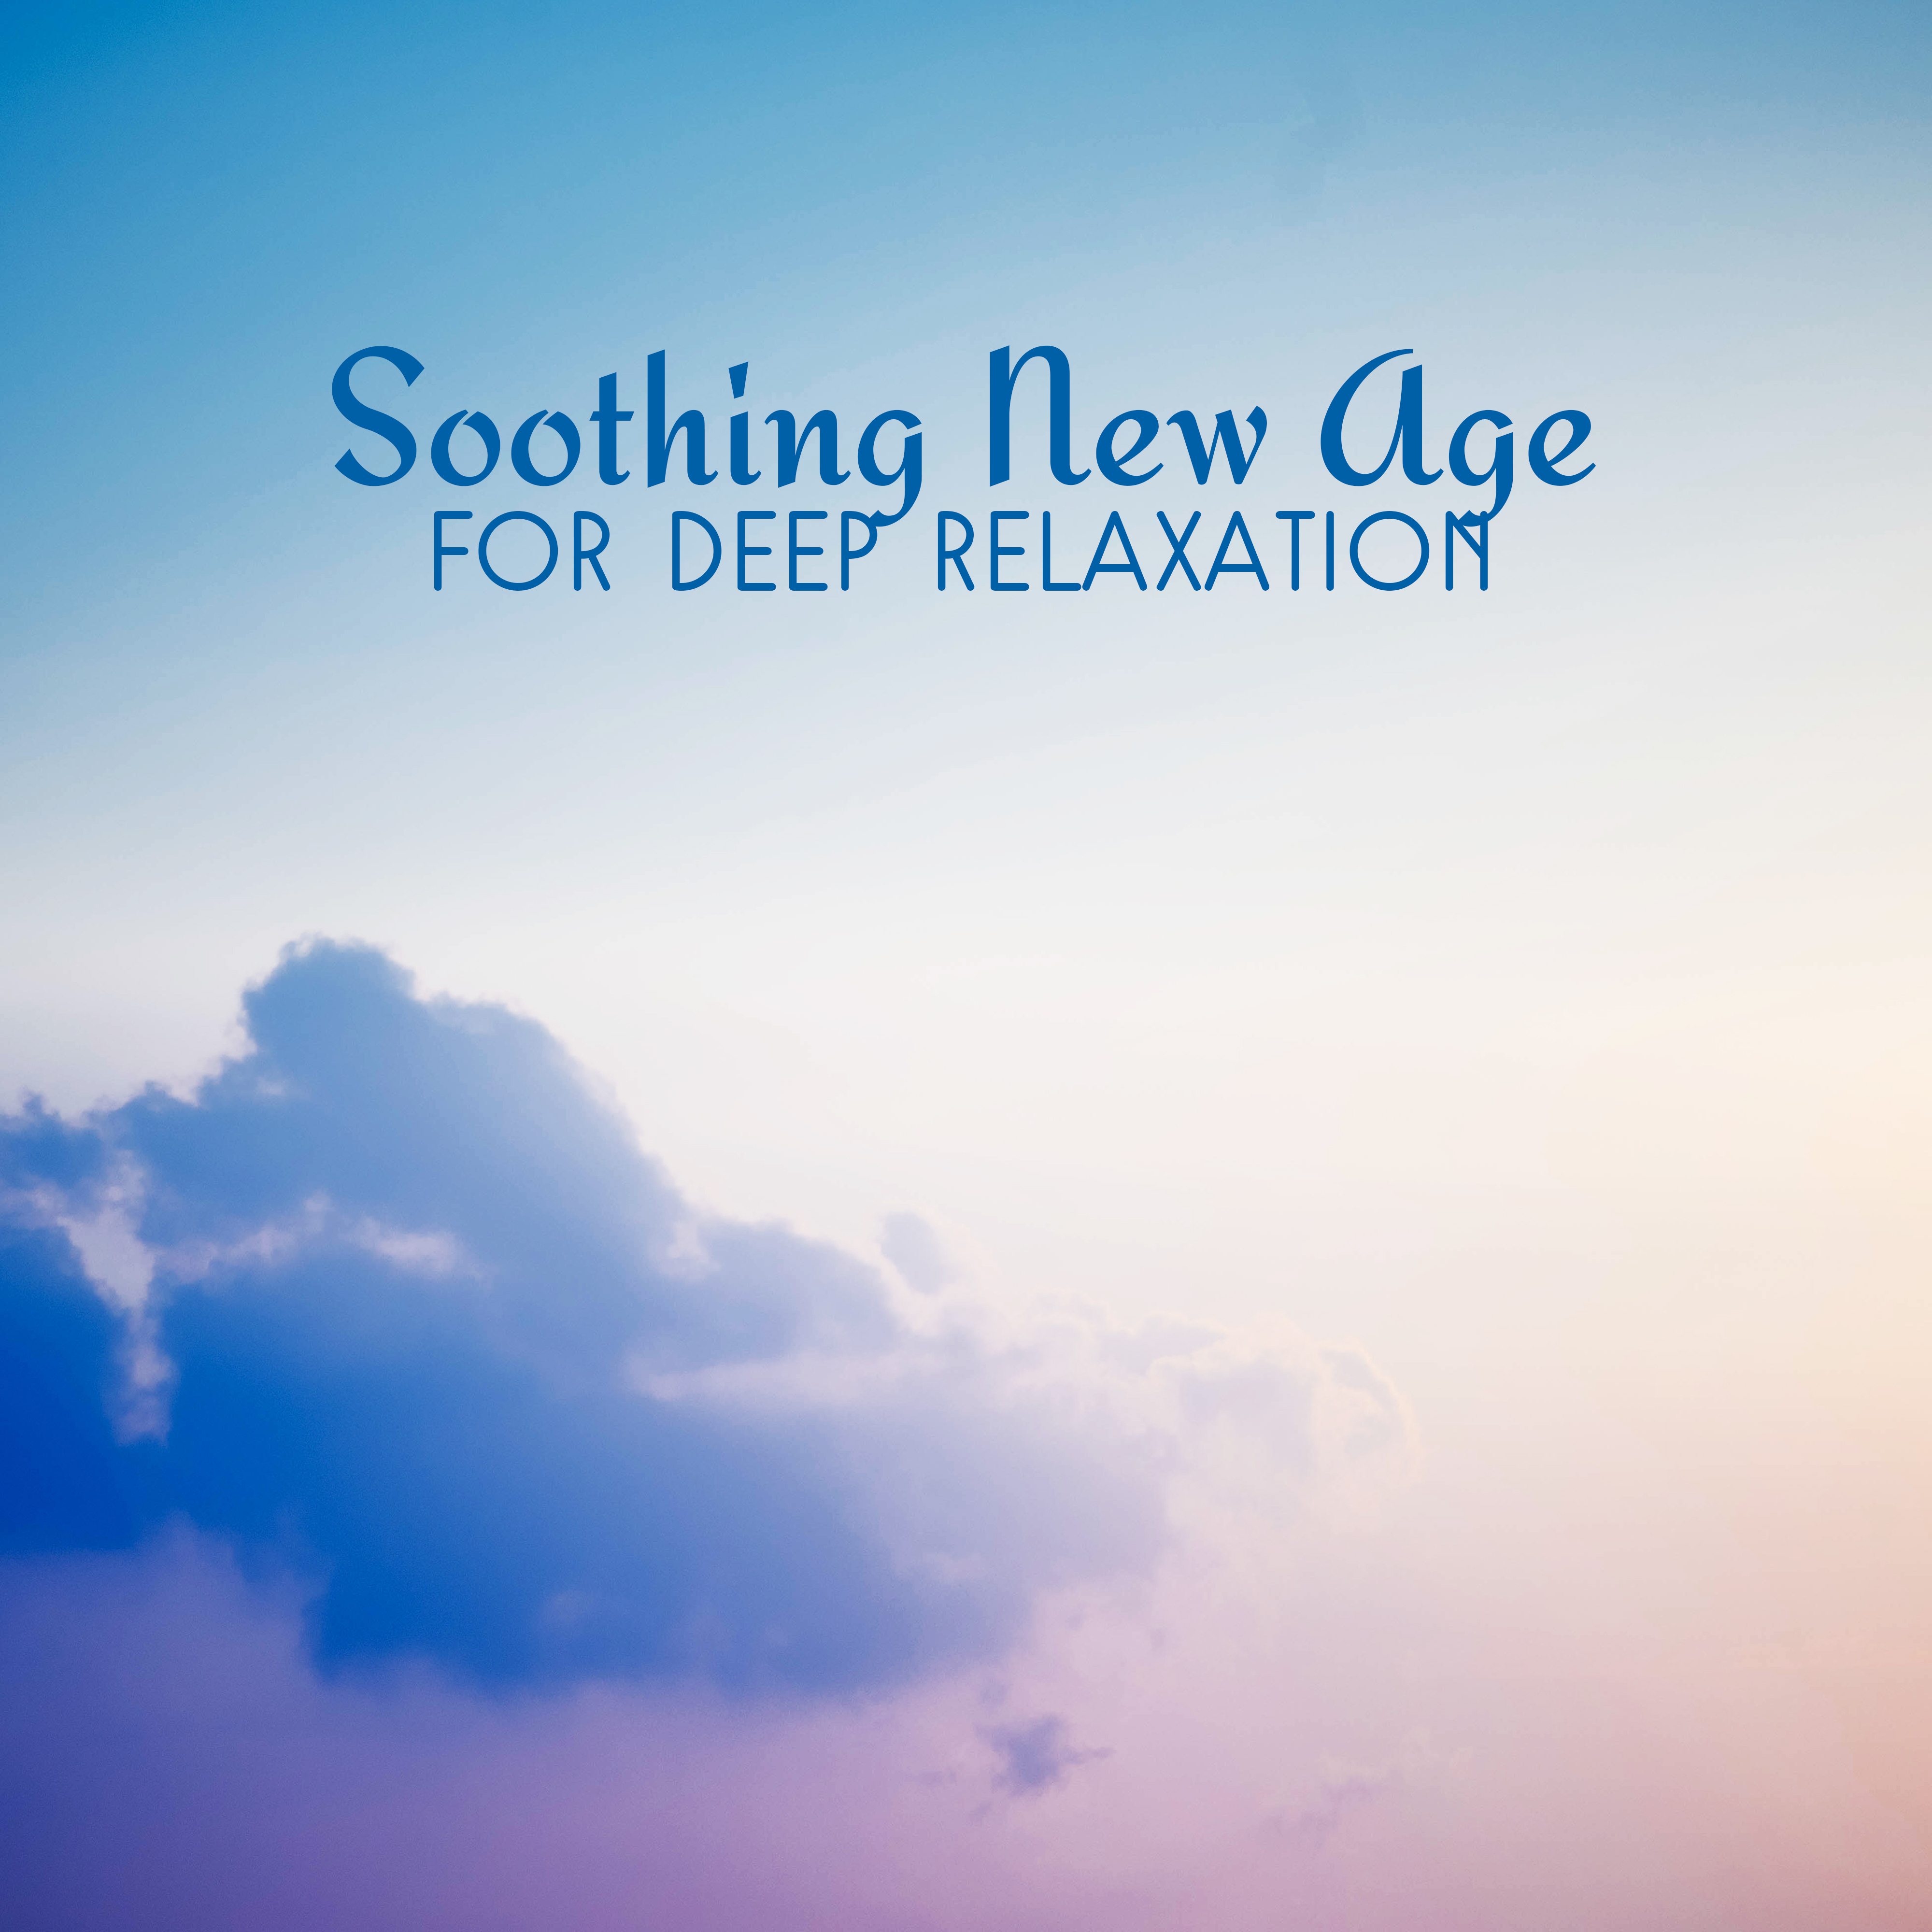 New Age Relaxation